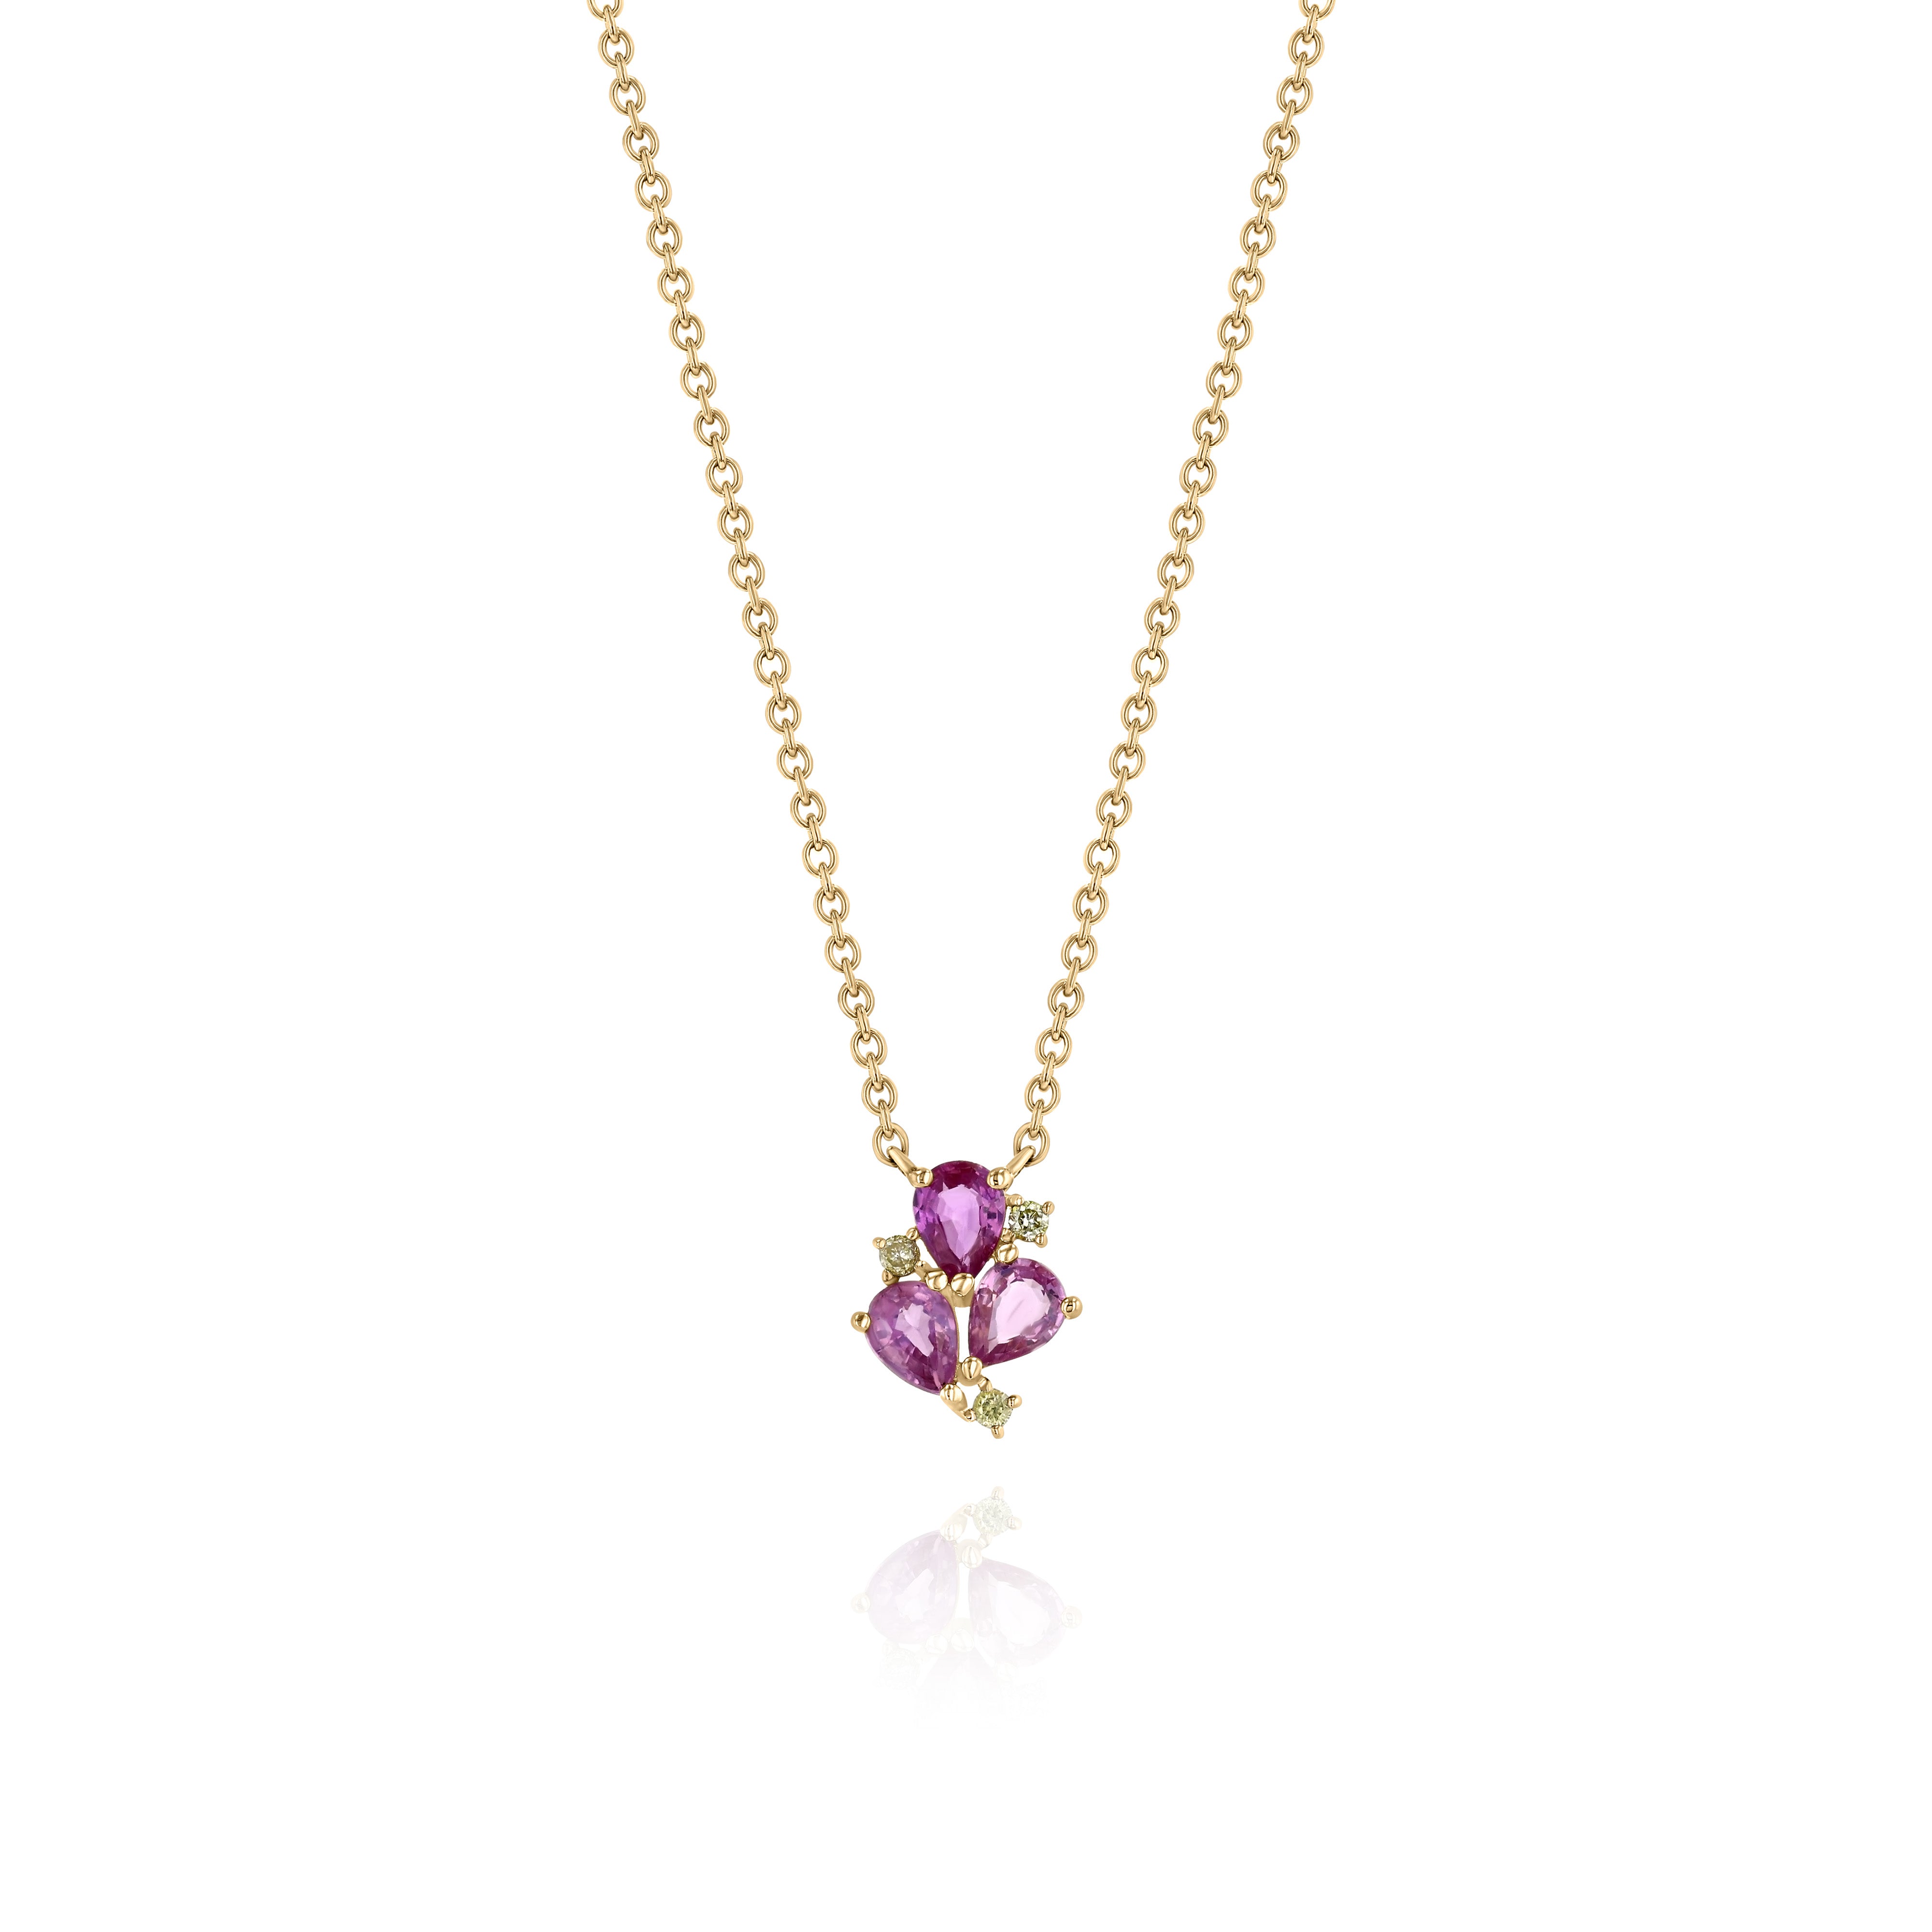 Yellow Gold Necklace with Pink Sapphires and Yellow Diamonds, Small